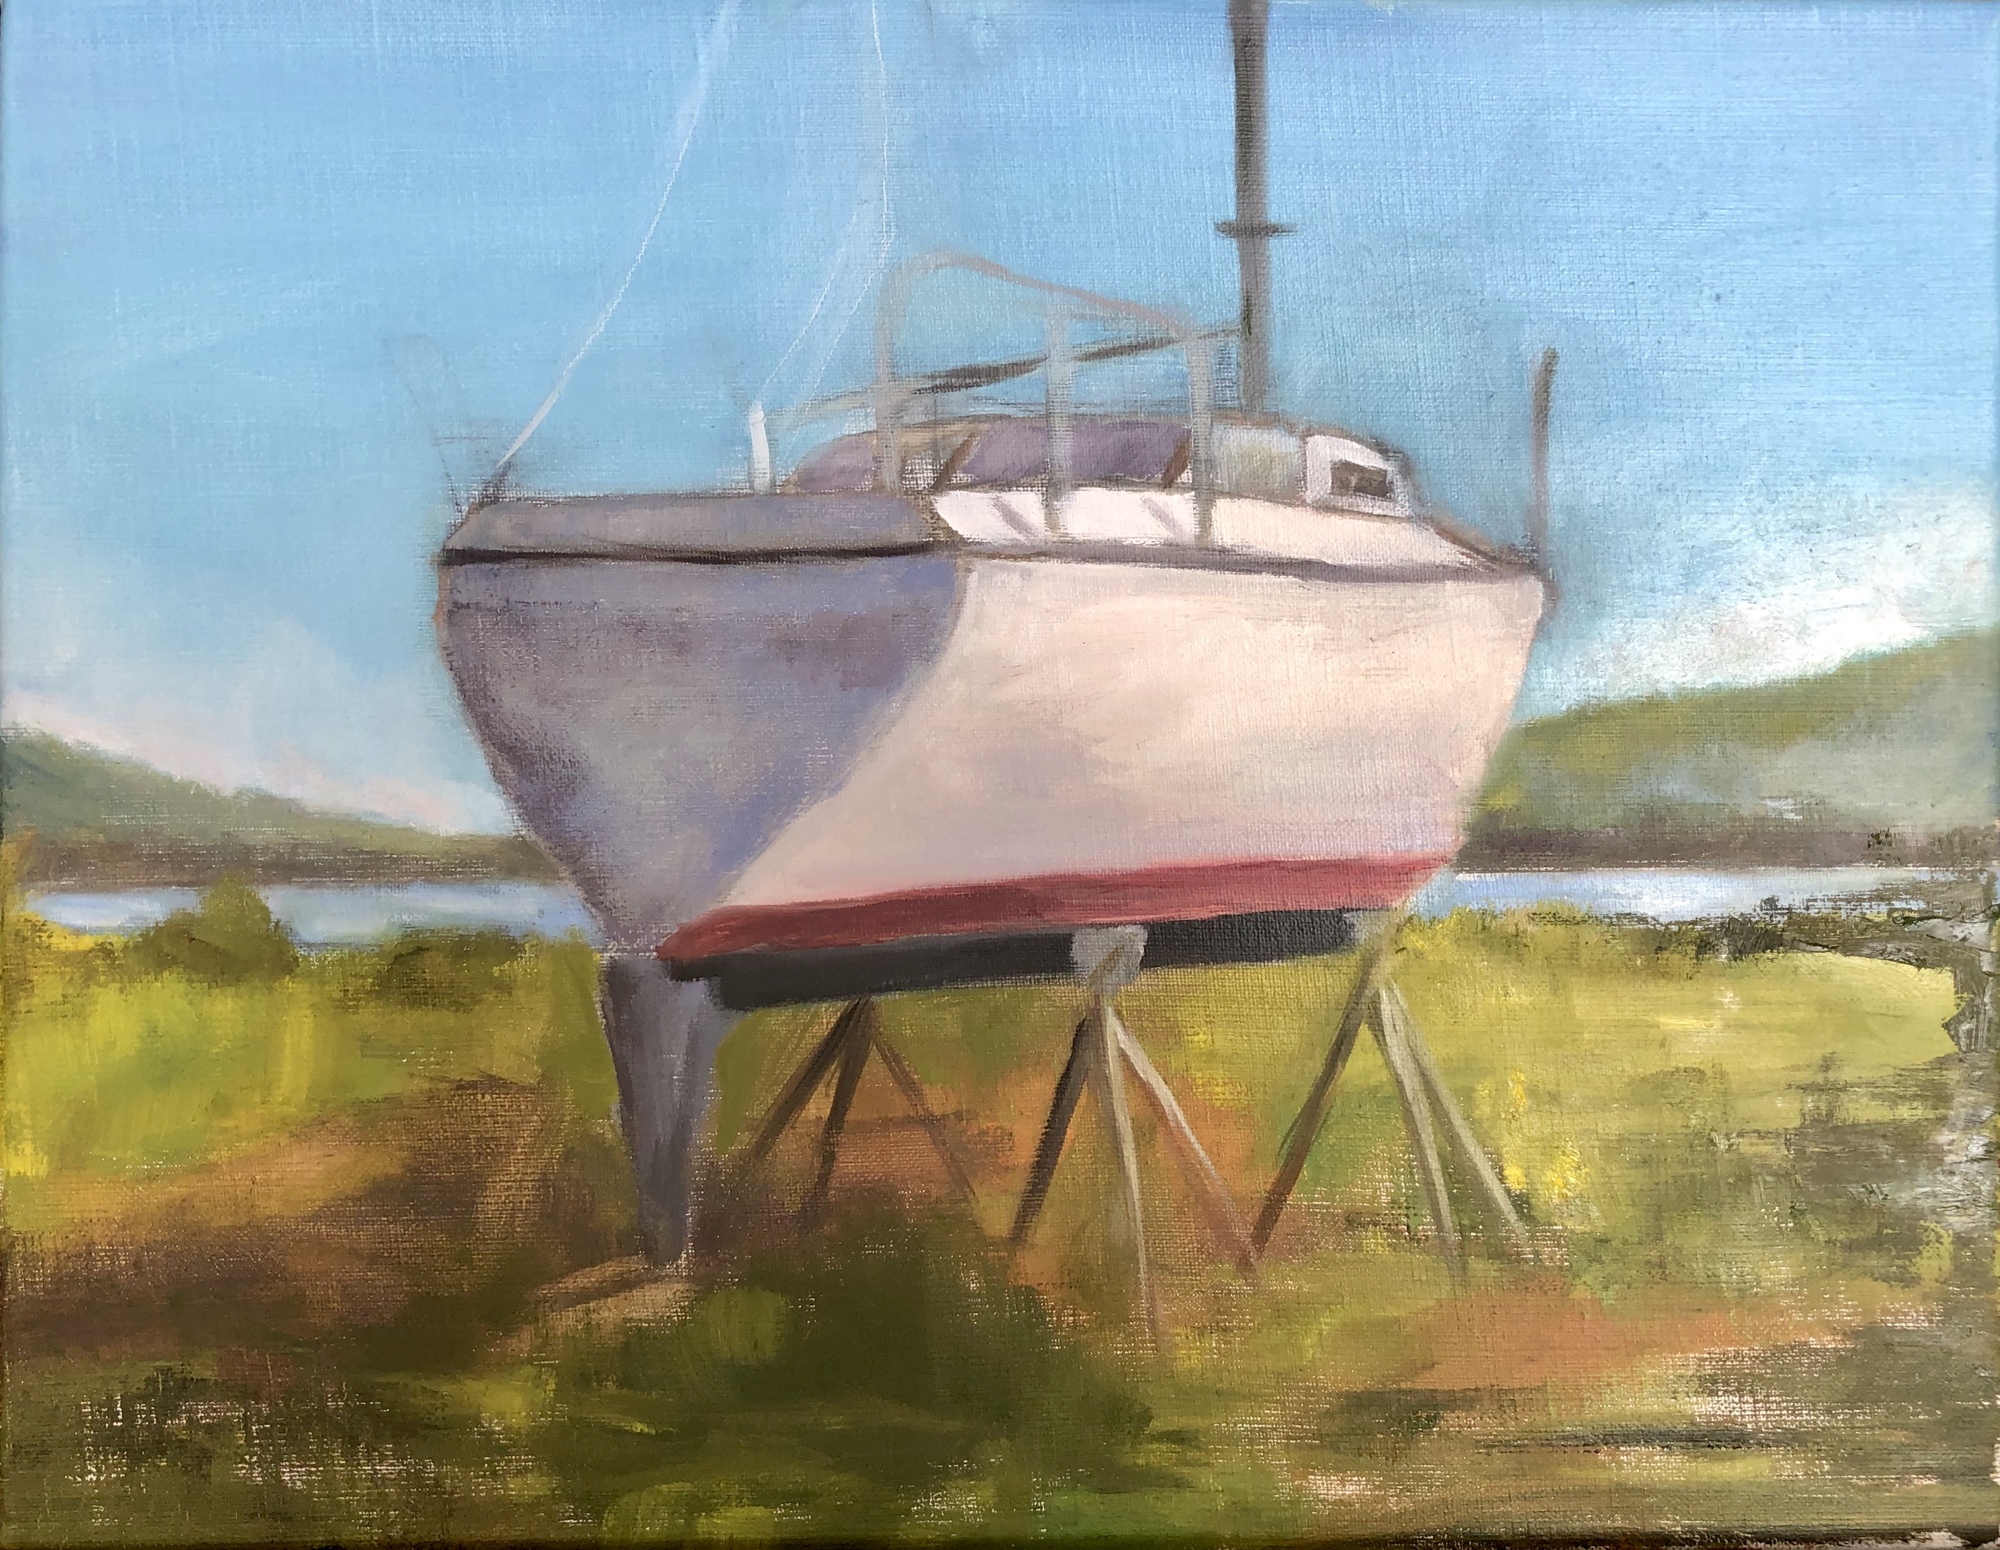 “Dry Dock in the Finger Lakes” by Barbara Saunders